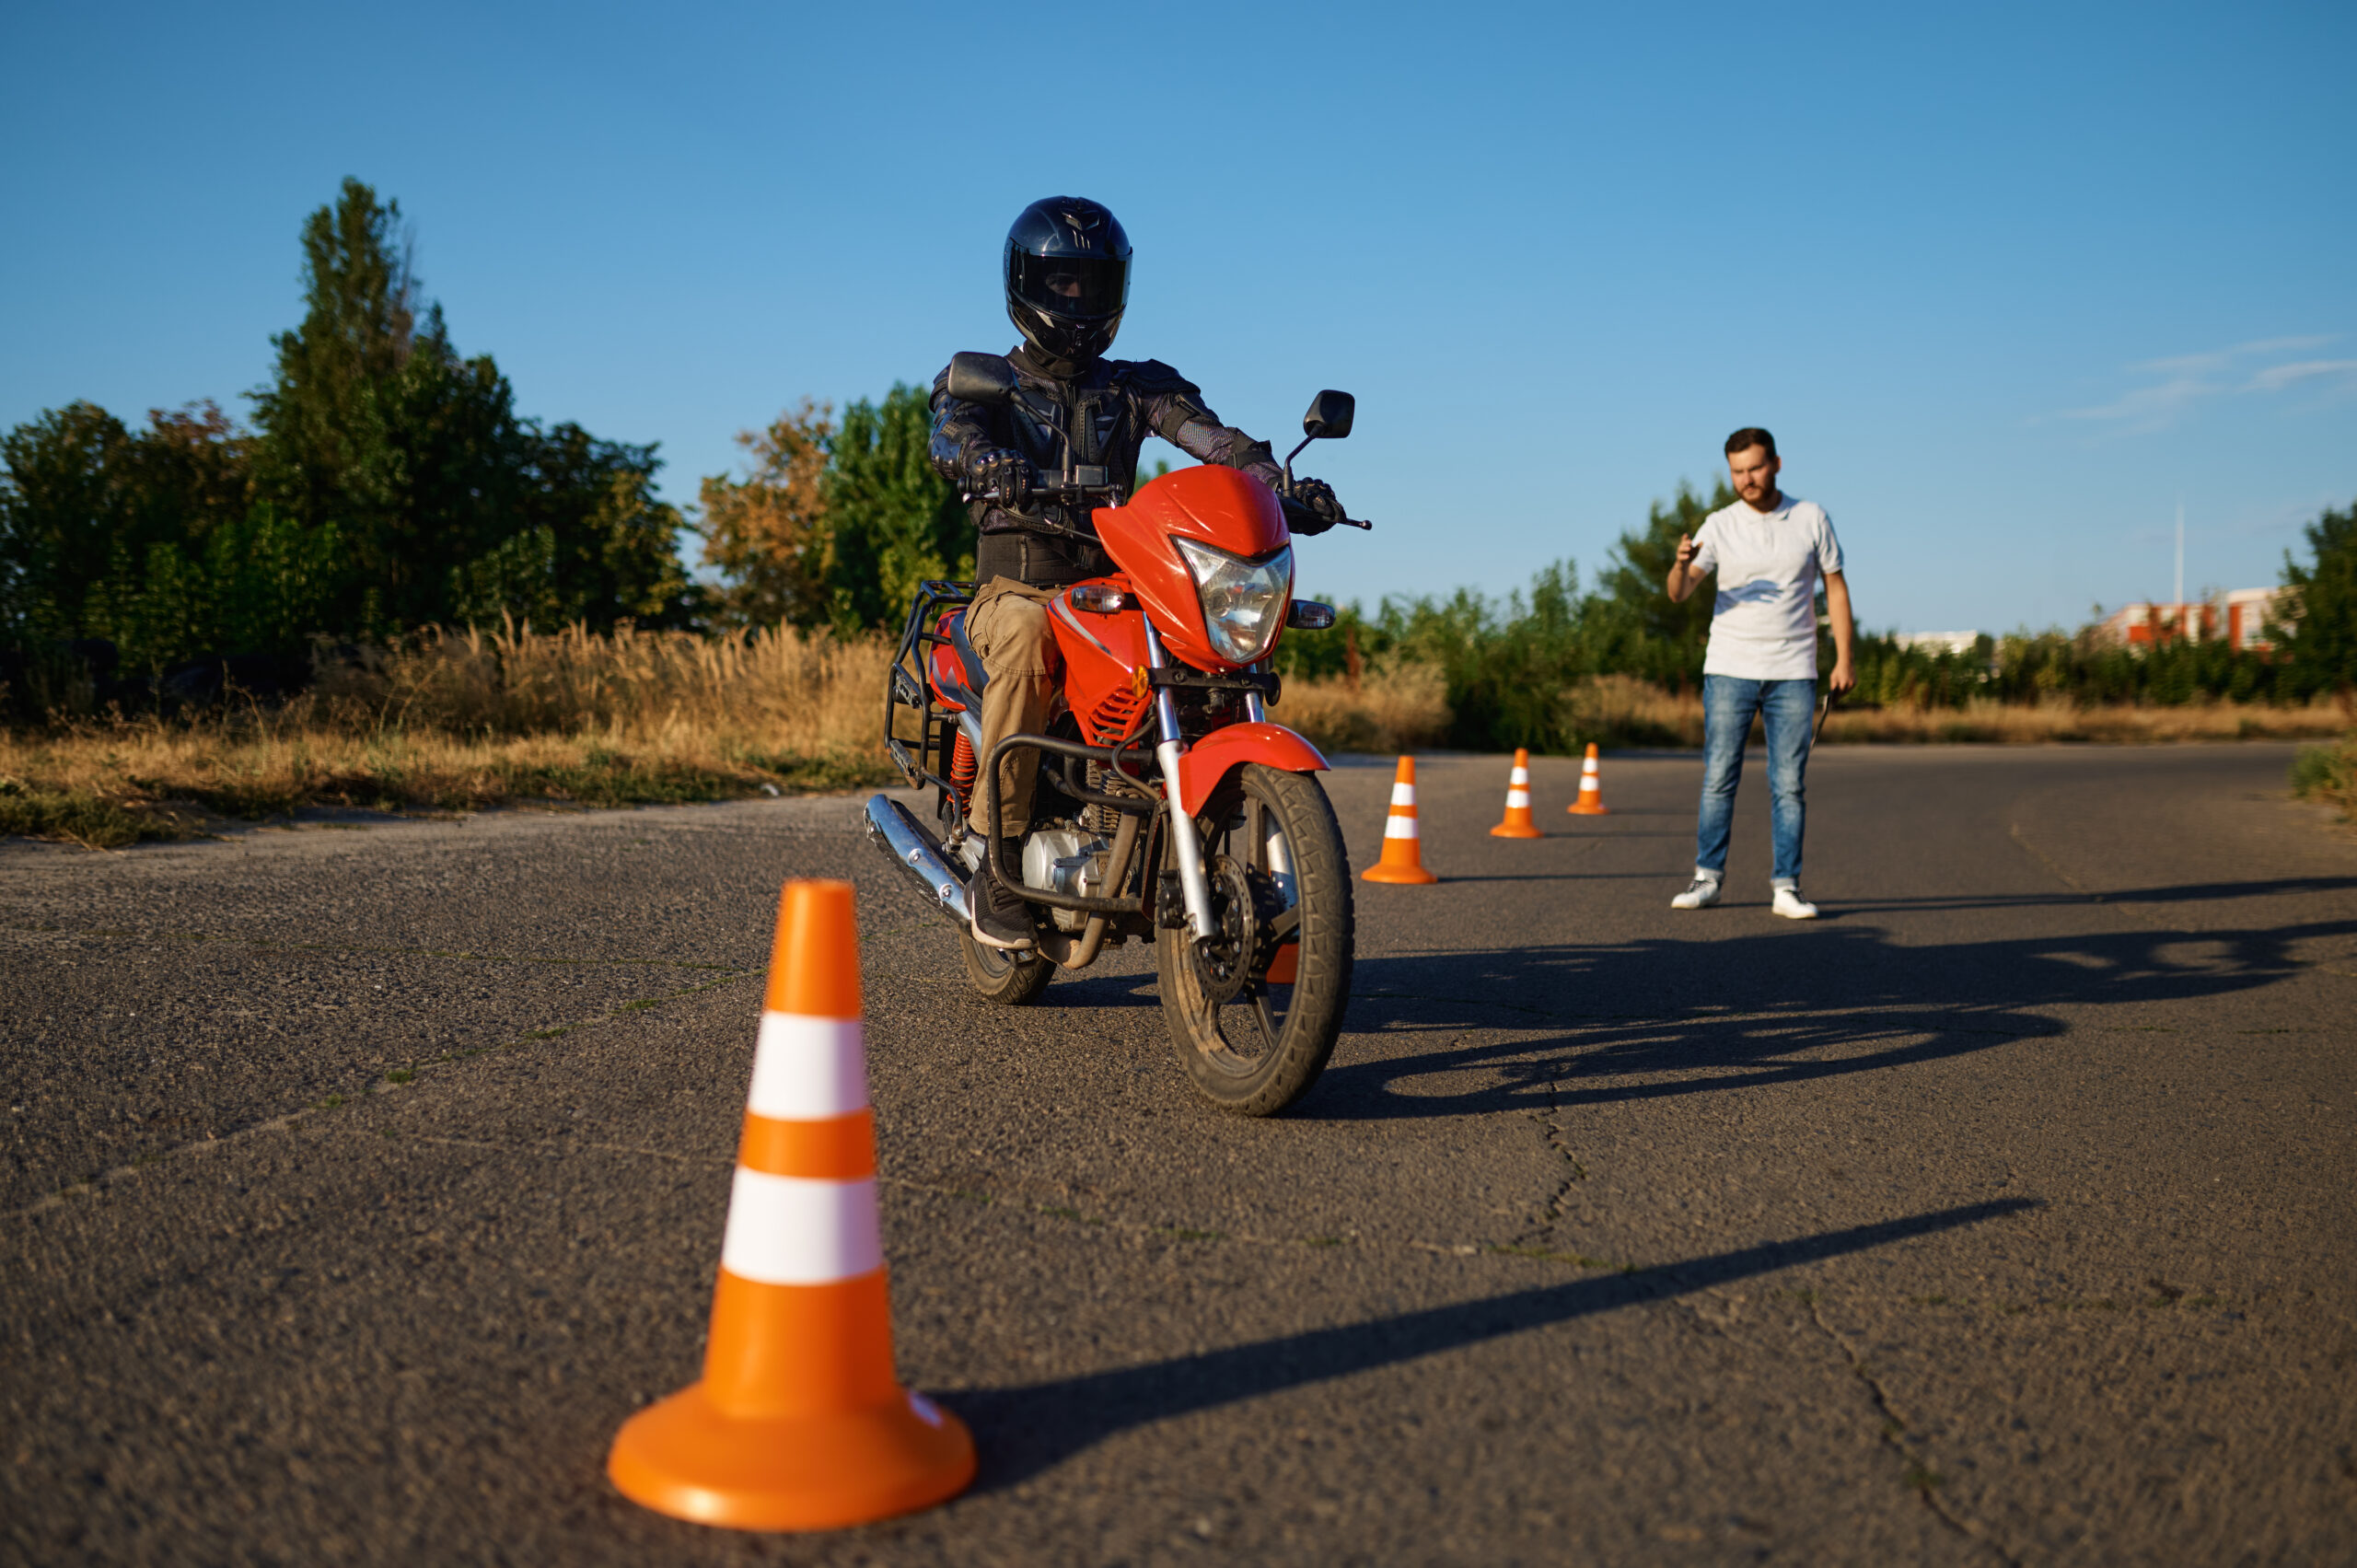 student and instructor exam in motorcycle school 2023 11 27 05 08 01 utc scaled